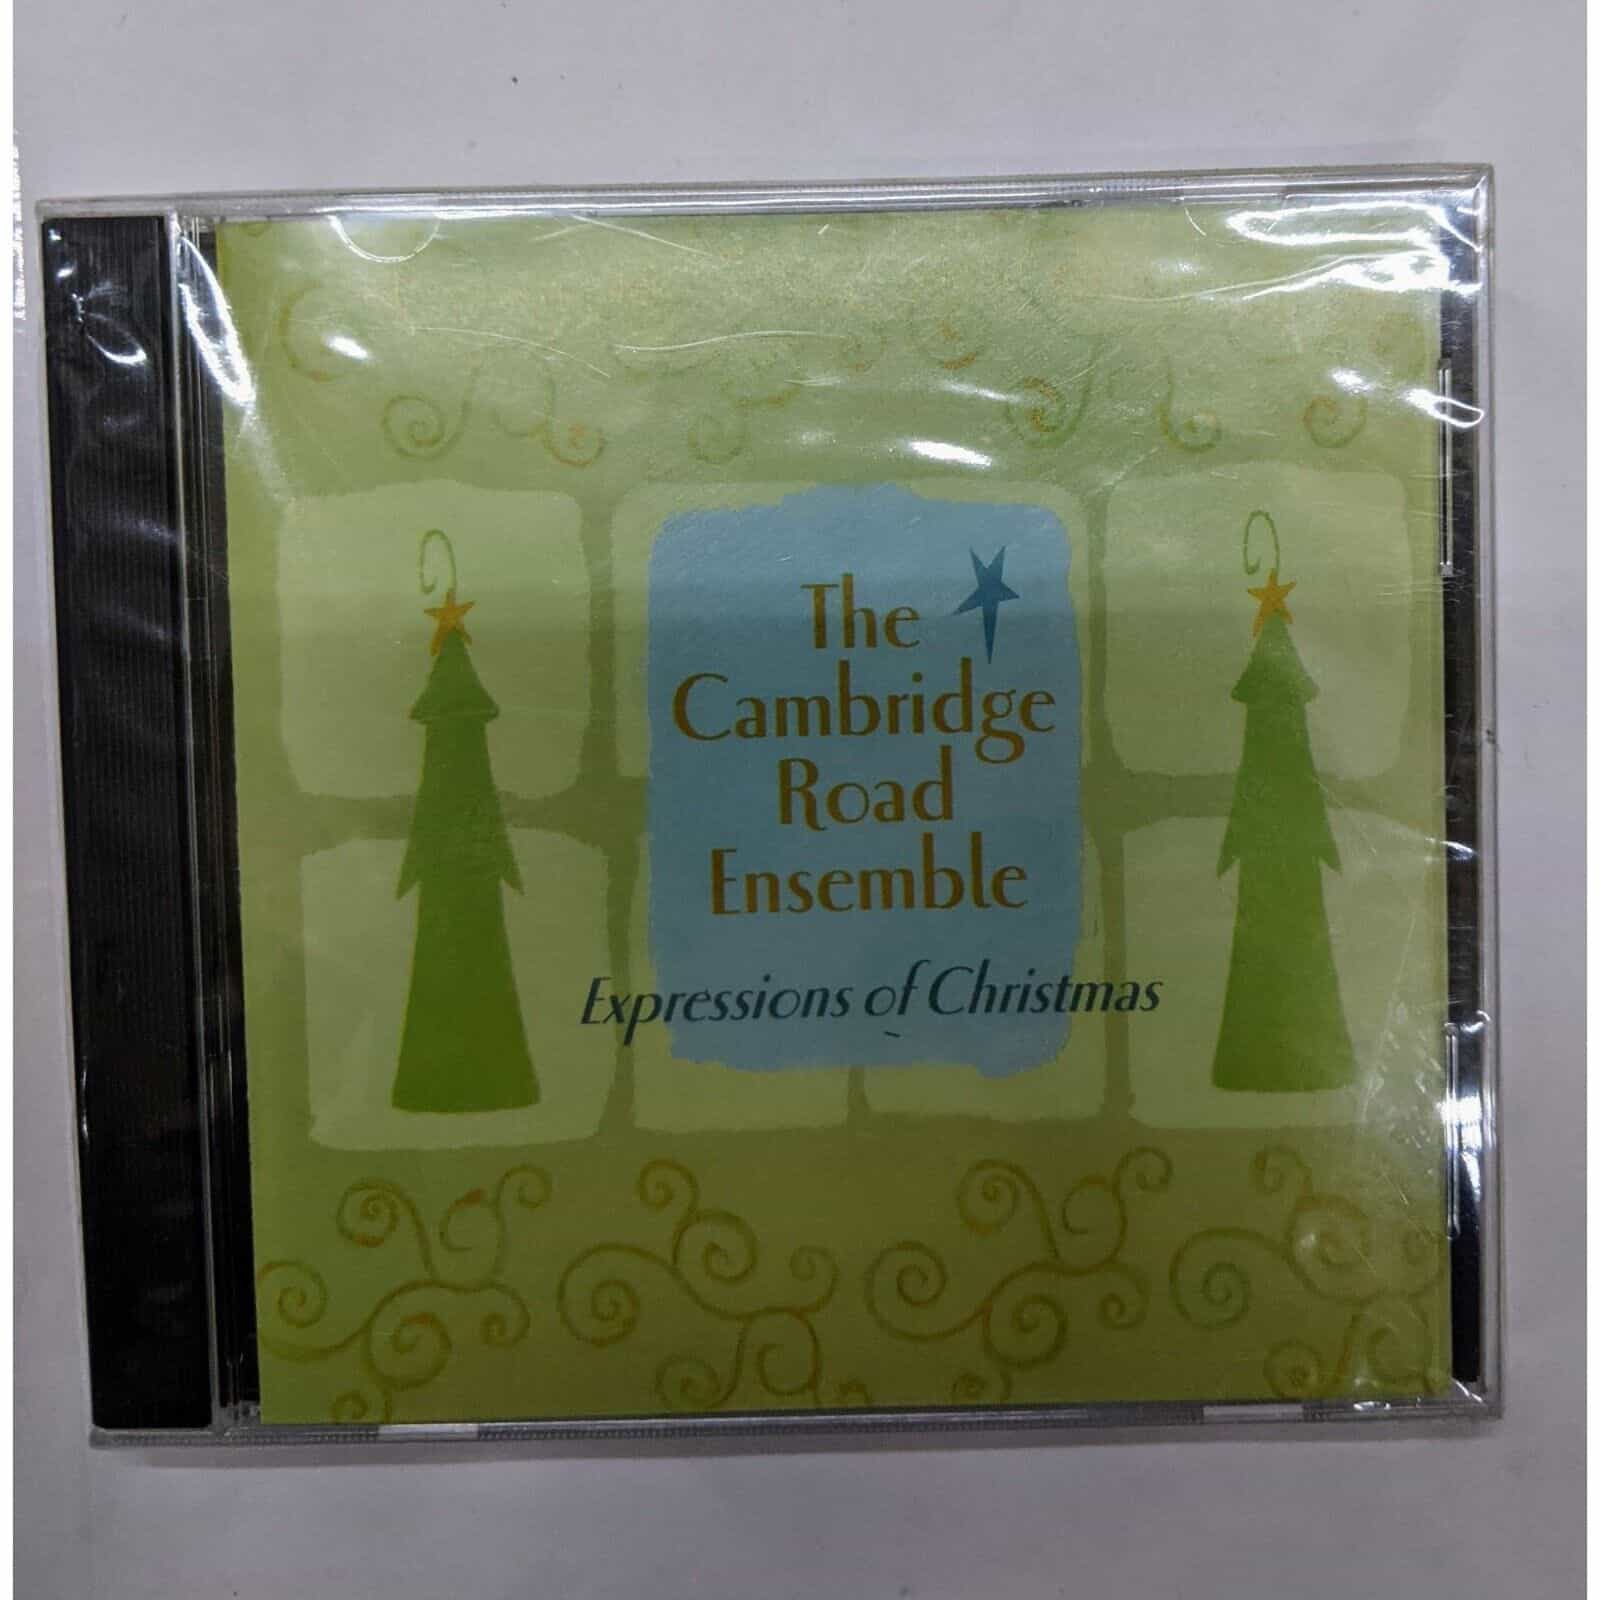 Expressions of Christmas by The Cambridge Road Ensemble  Music Album